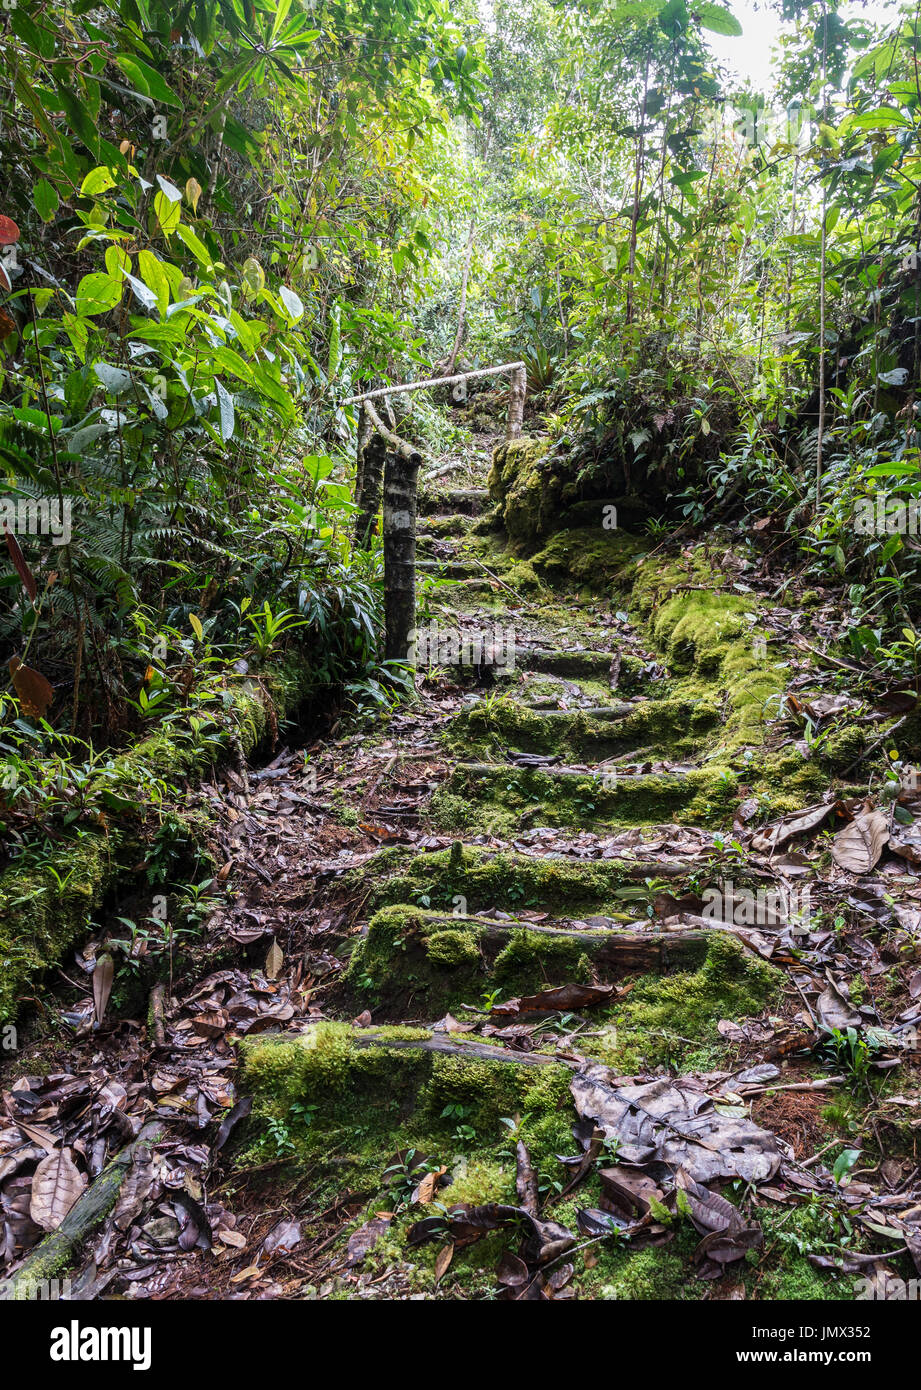 A forest trail covered by lush green moss. Colombia, South America. Stock Photo